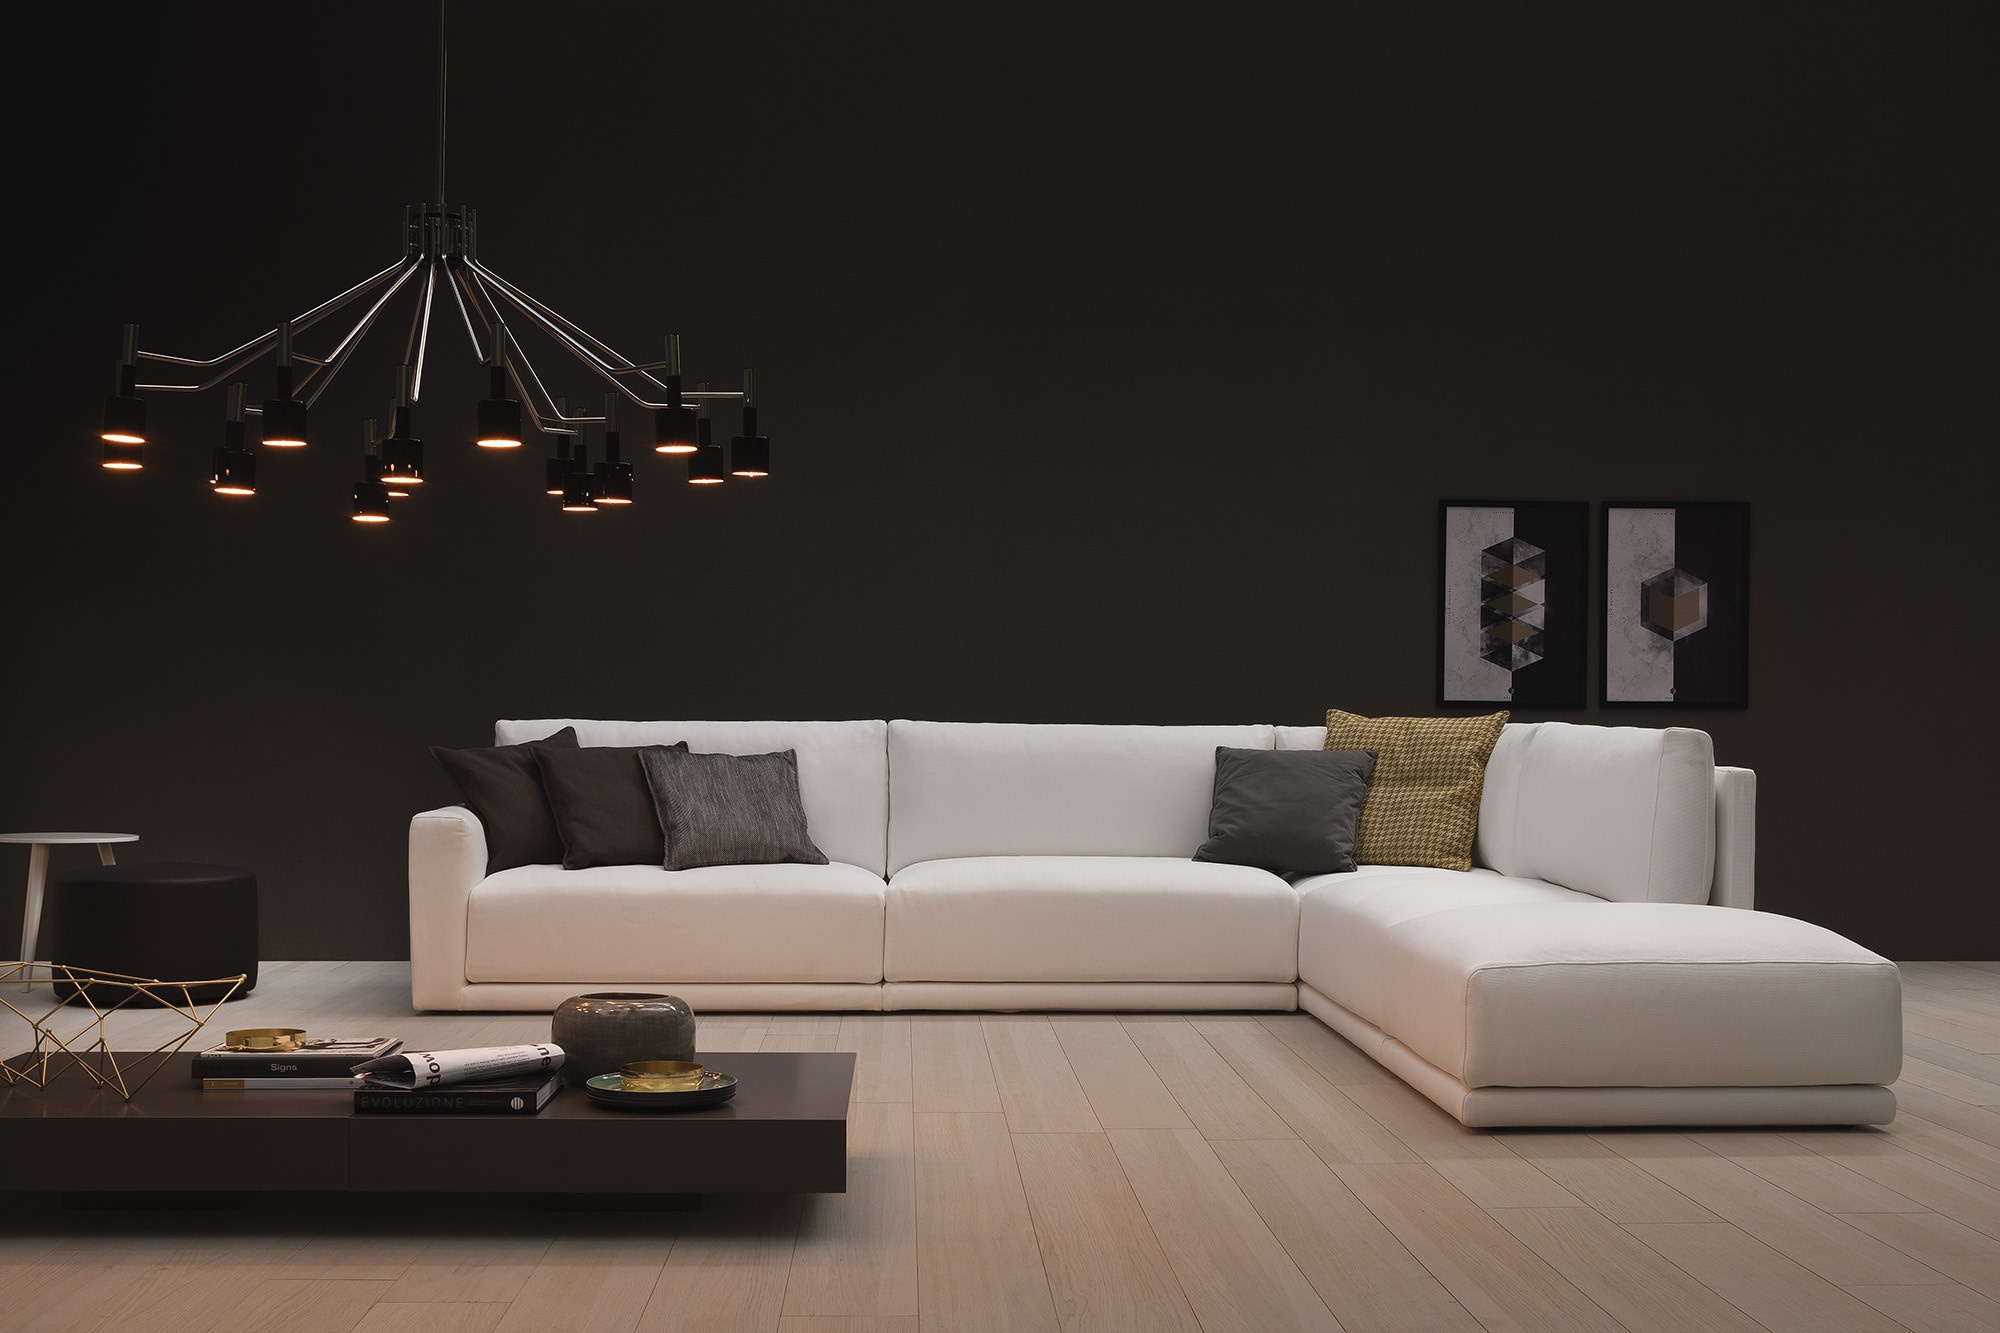 Top 10 Modern Suspension Lamps for your Home Decor